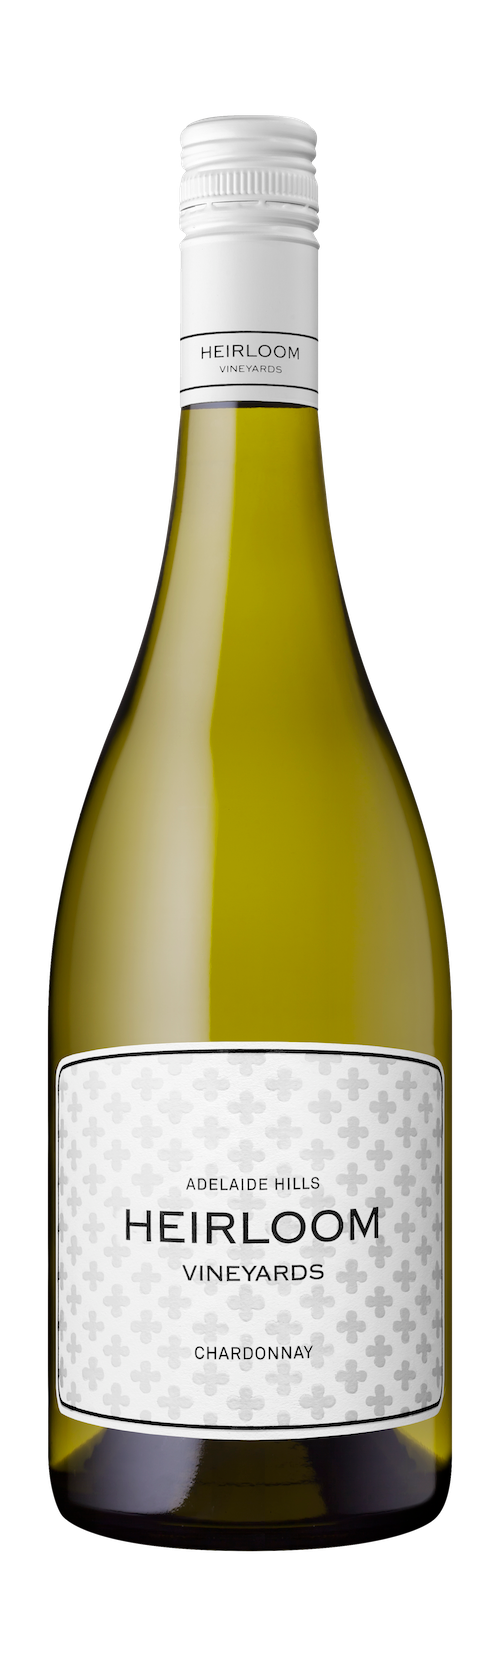 MUSEUM RELEASE: Adelaide Hills Chardonnay 2017